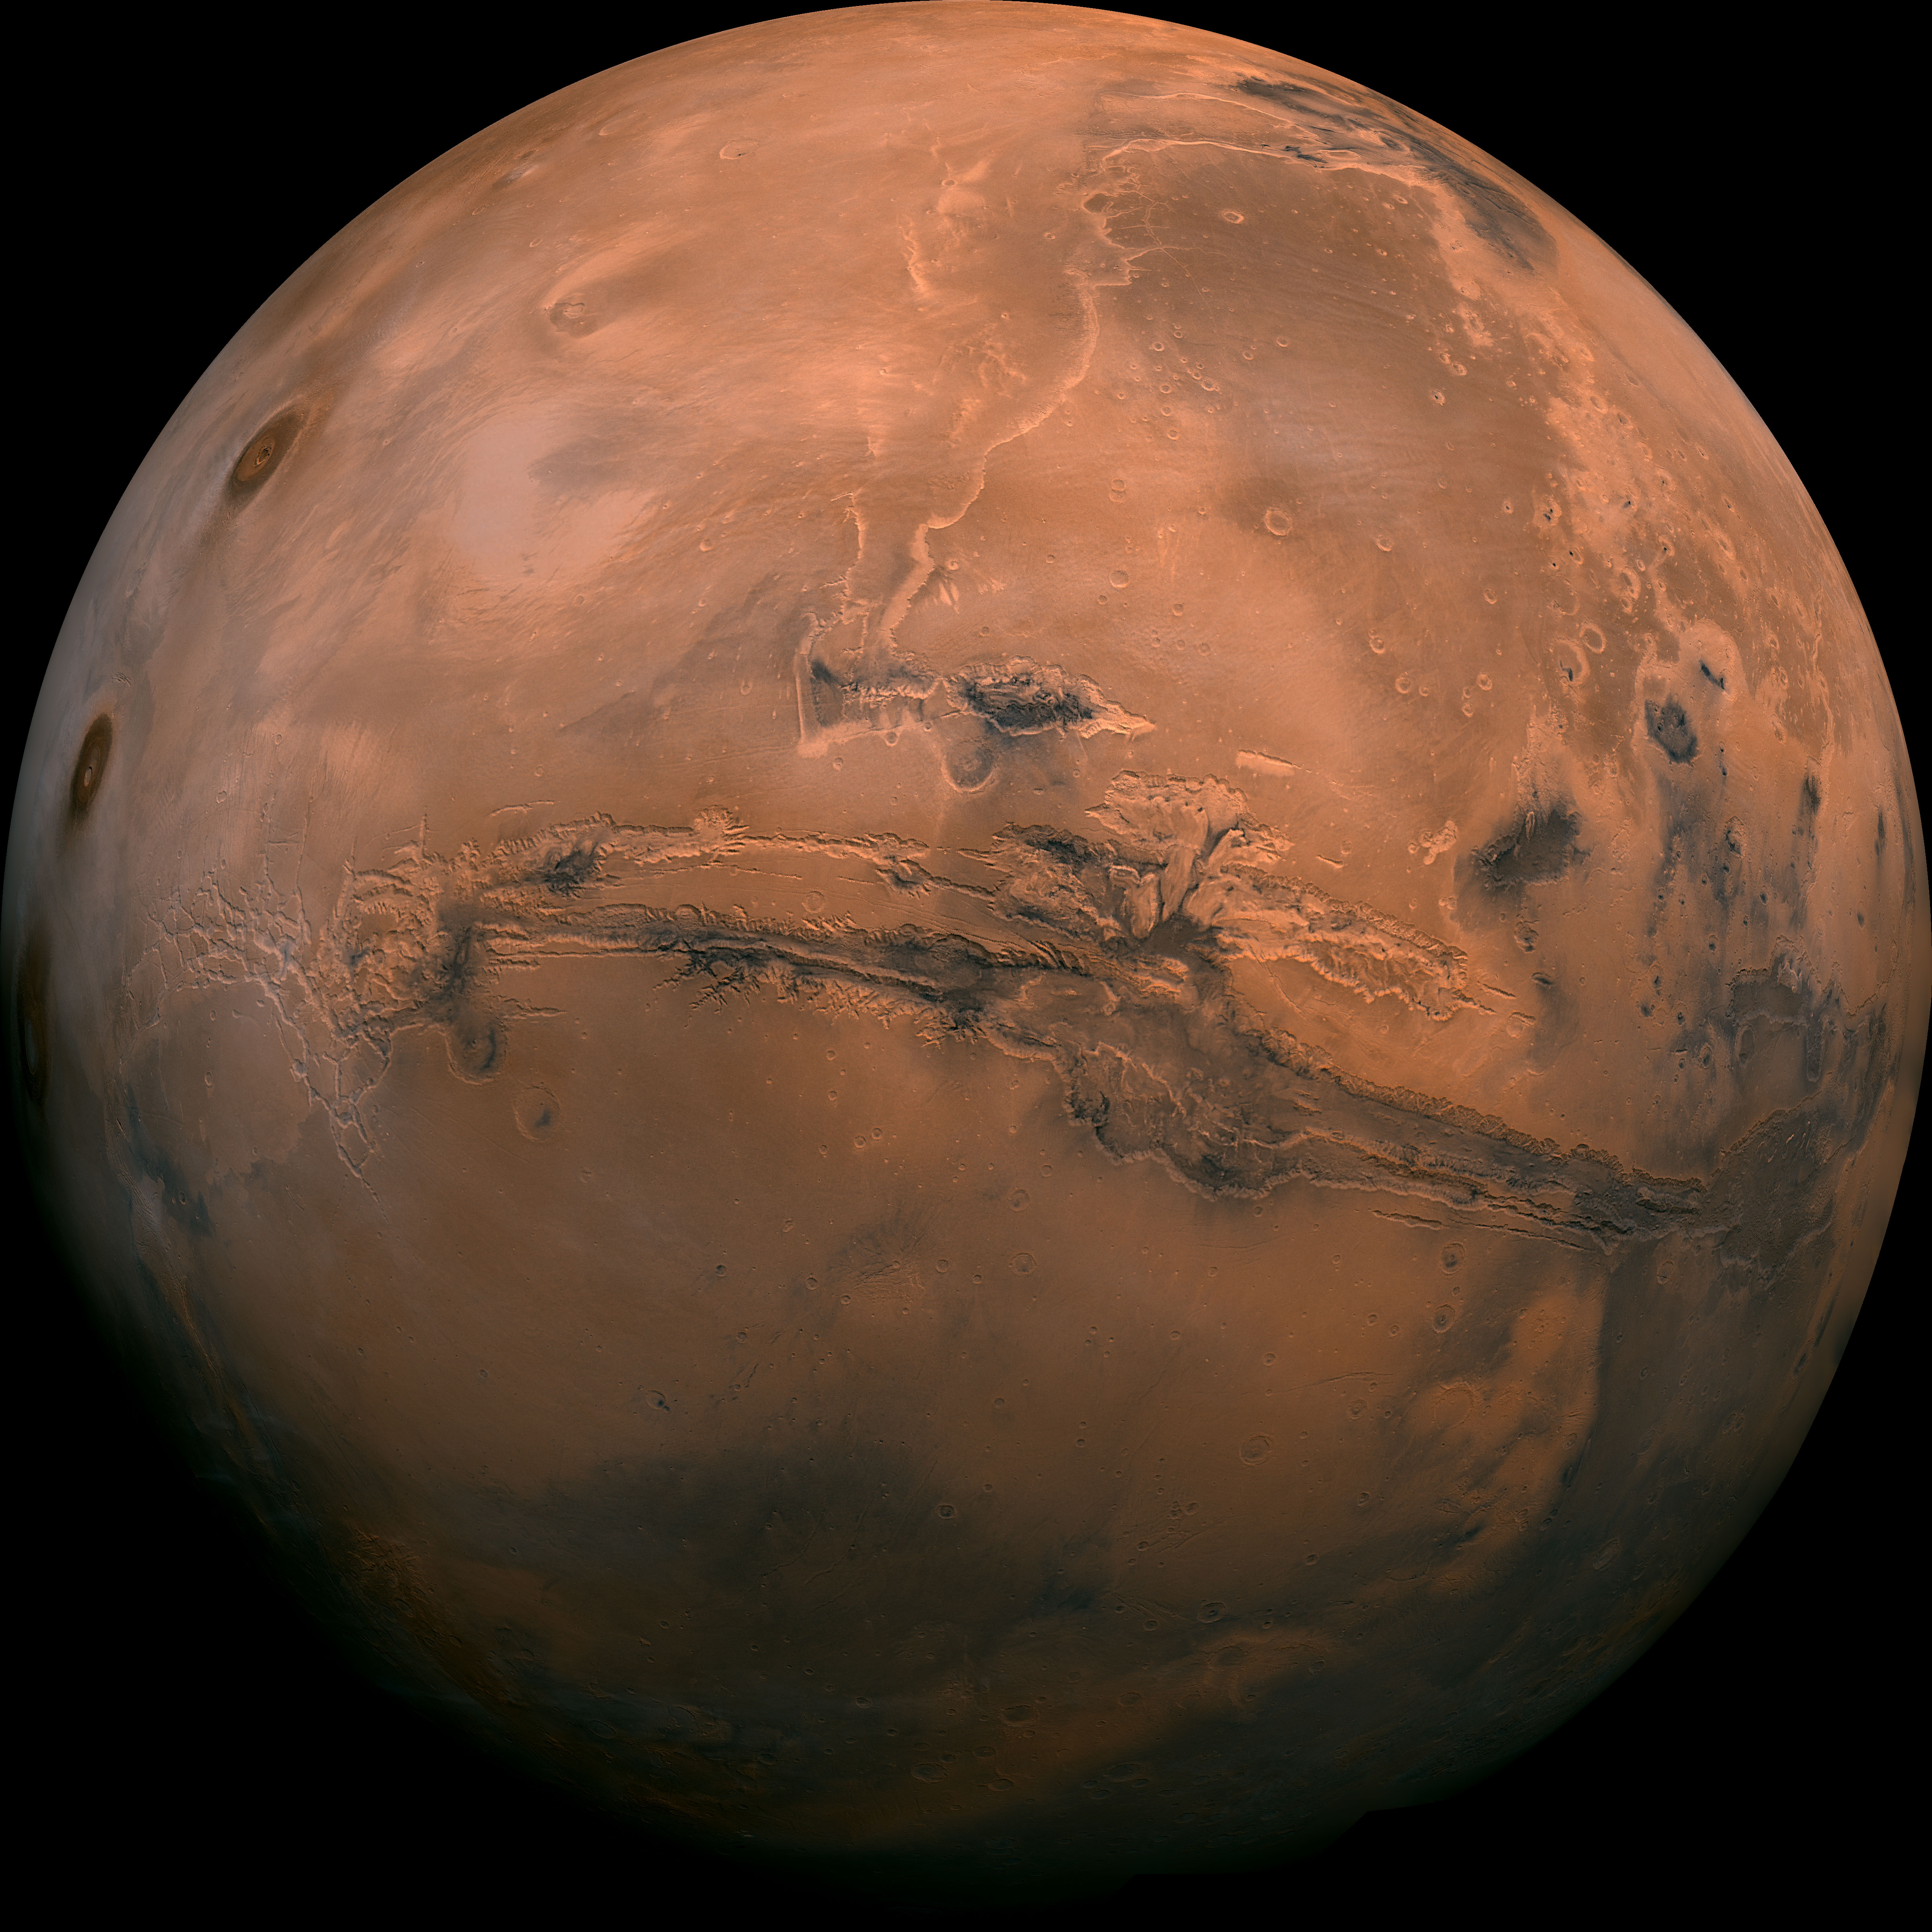 Mosaic of the Valles Marineris hemisphere of Mars projected into point perspective